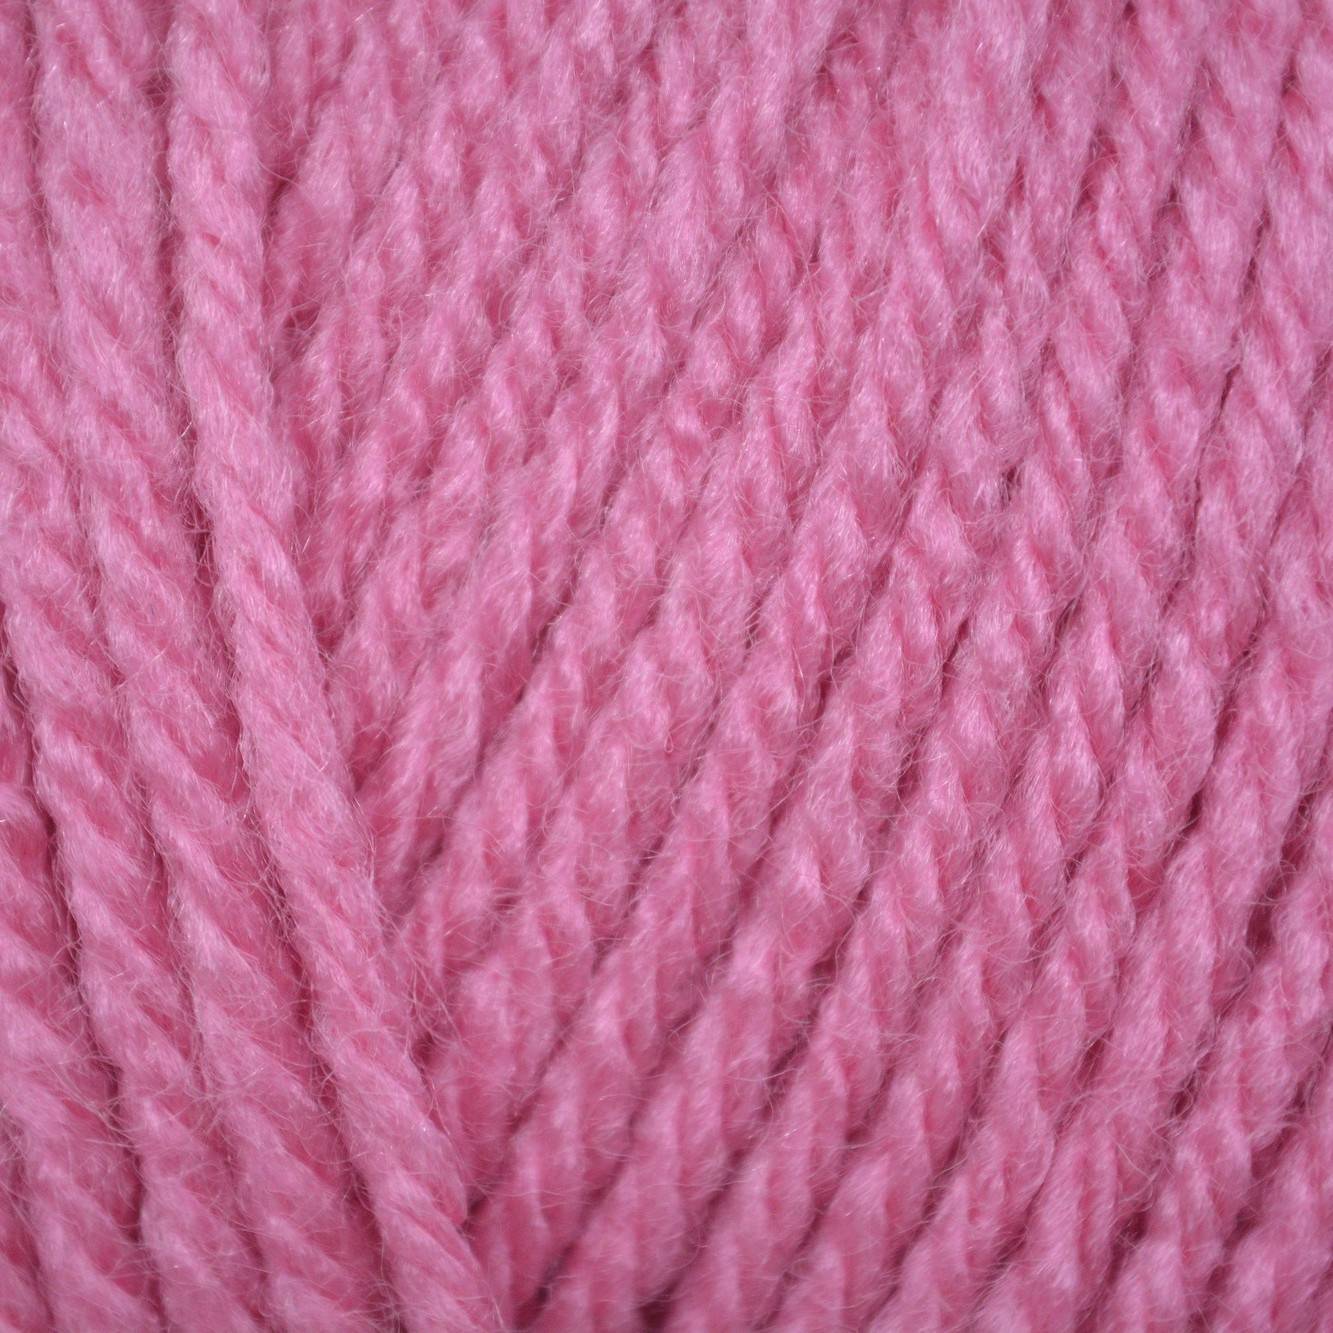 Cygnet Chunky - Baby Pink (784) | The Knitting Network